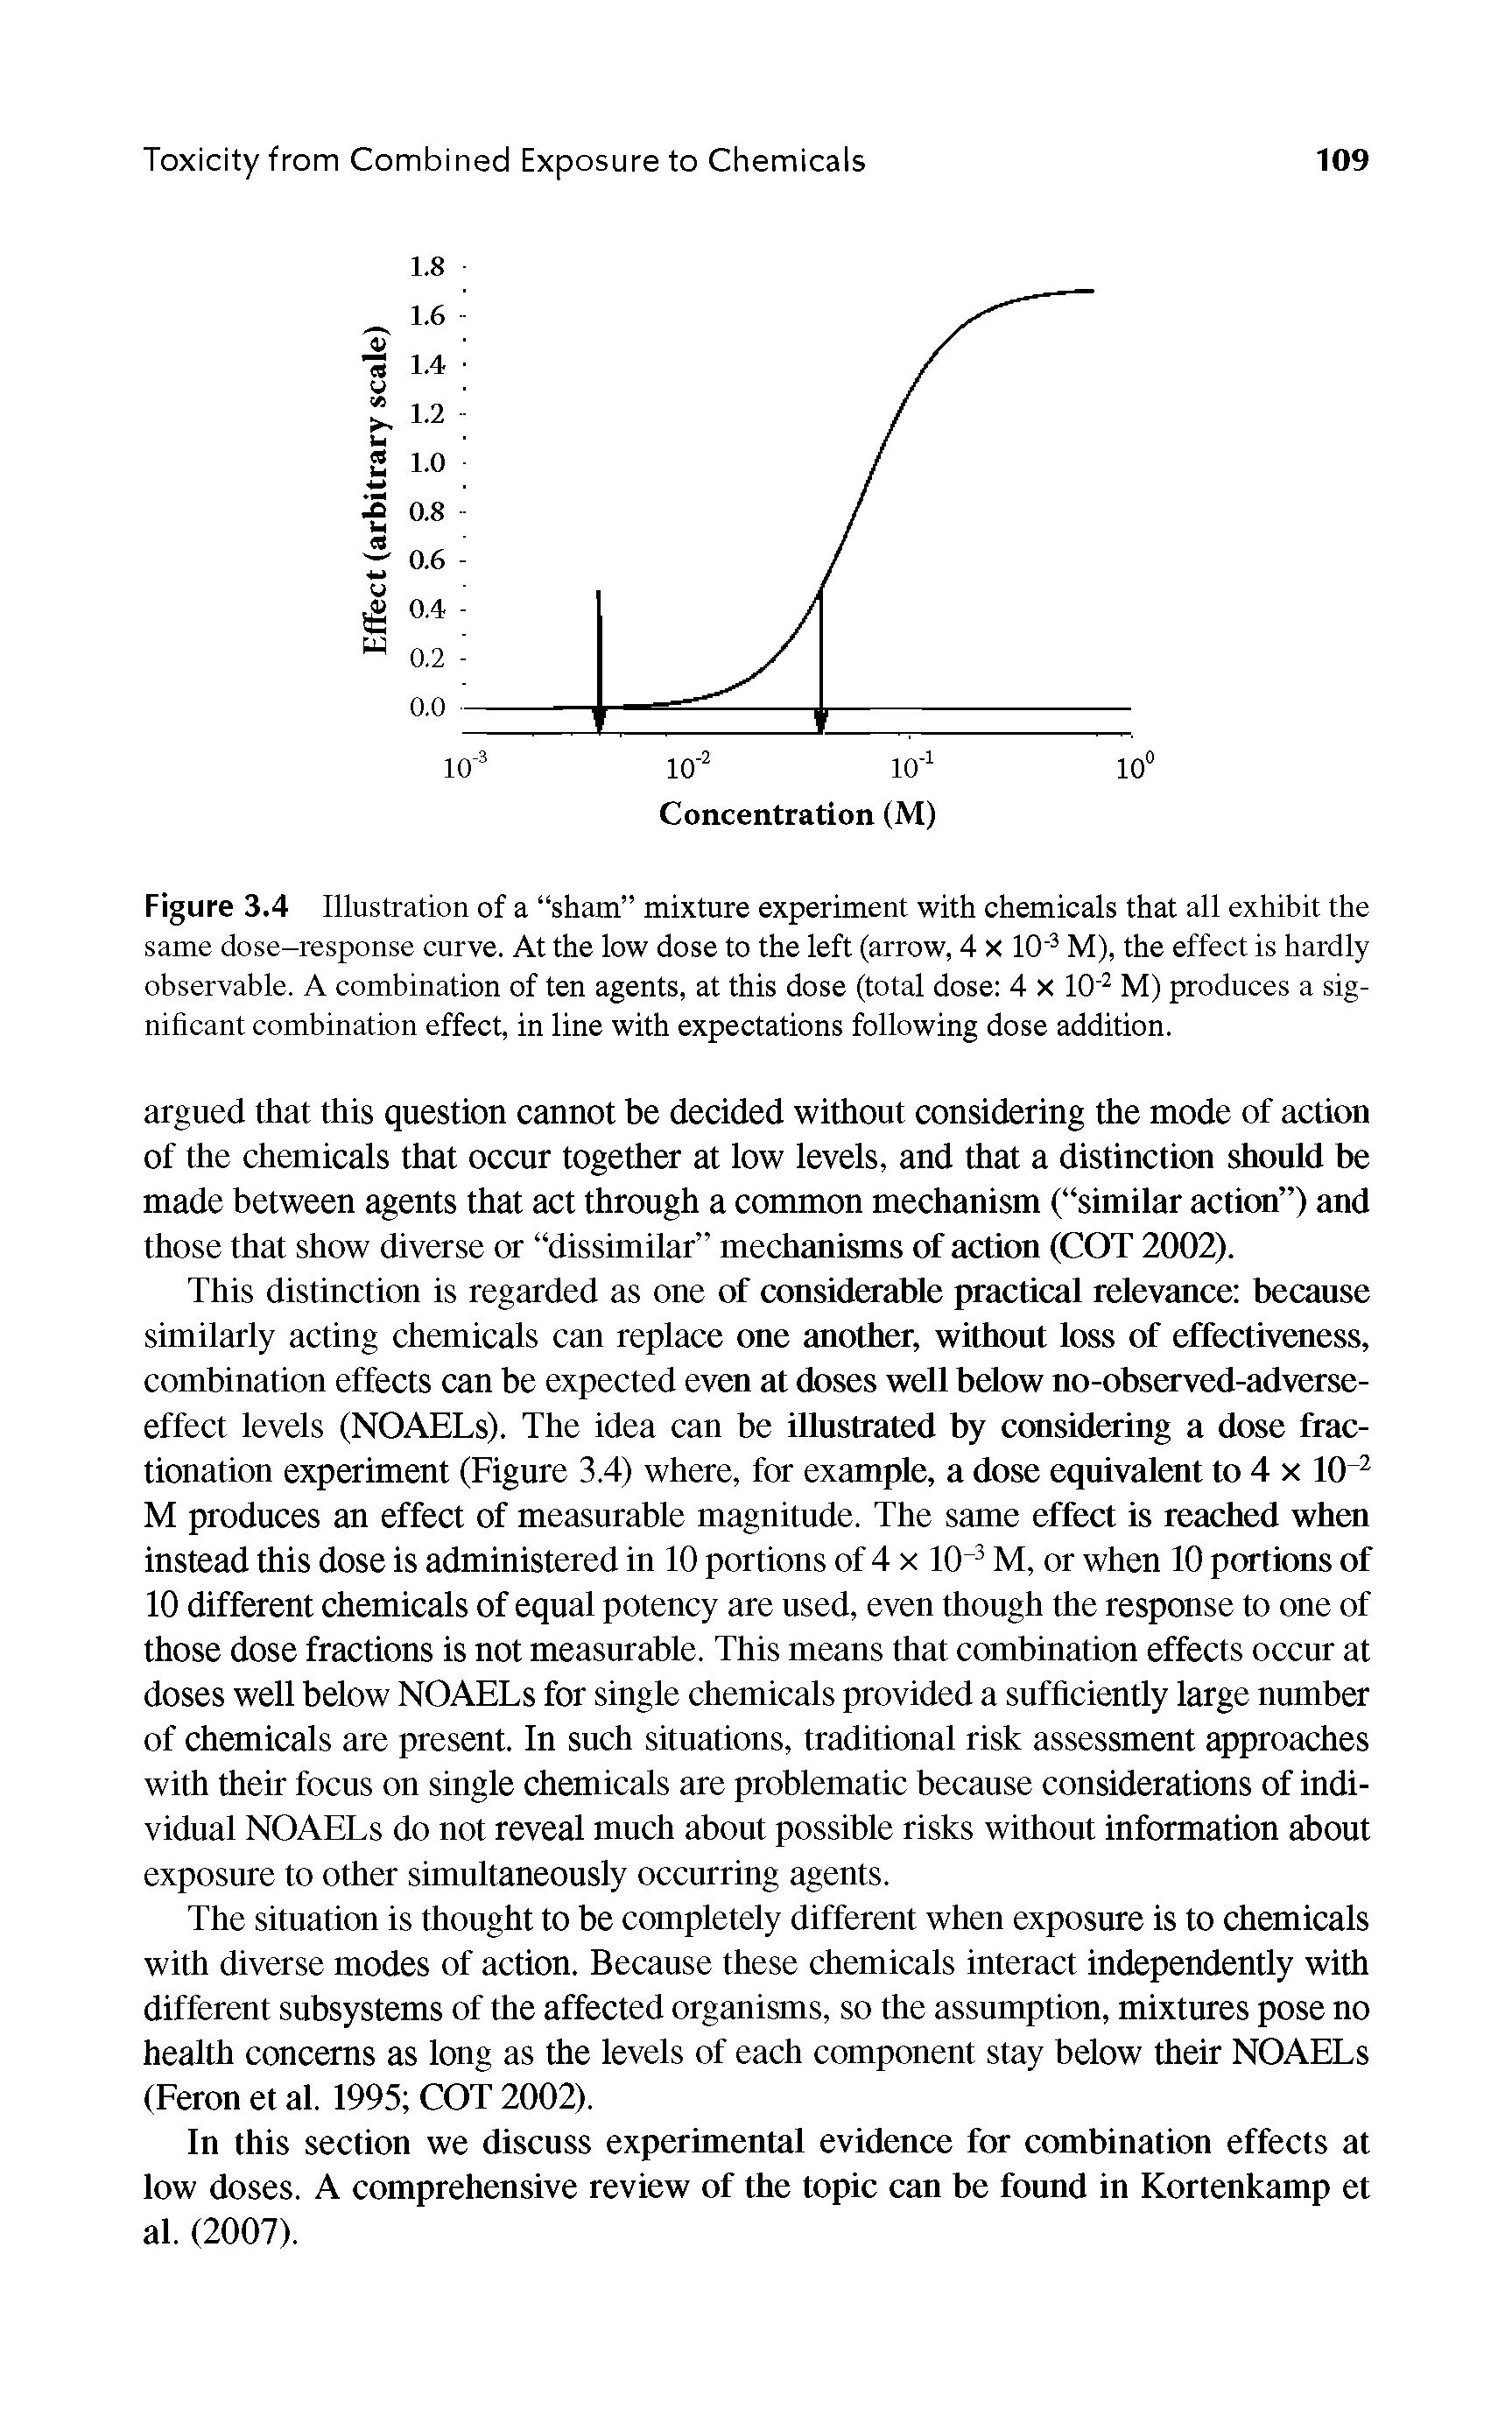 Figure 3.4 Illustration of a sham mixture experiment with chemicals that all exhibit the same dose-response curve. At the low dose to the left (arrow, 4 X 10 3 M), the effect is hardly observable. A combination of ten agents, at this dose (total dose 4 X 10 2 M) produces a significant combination effect, in line with expectations following dose addition.